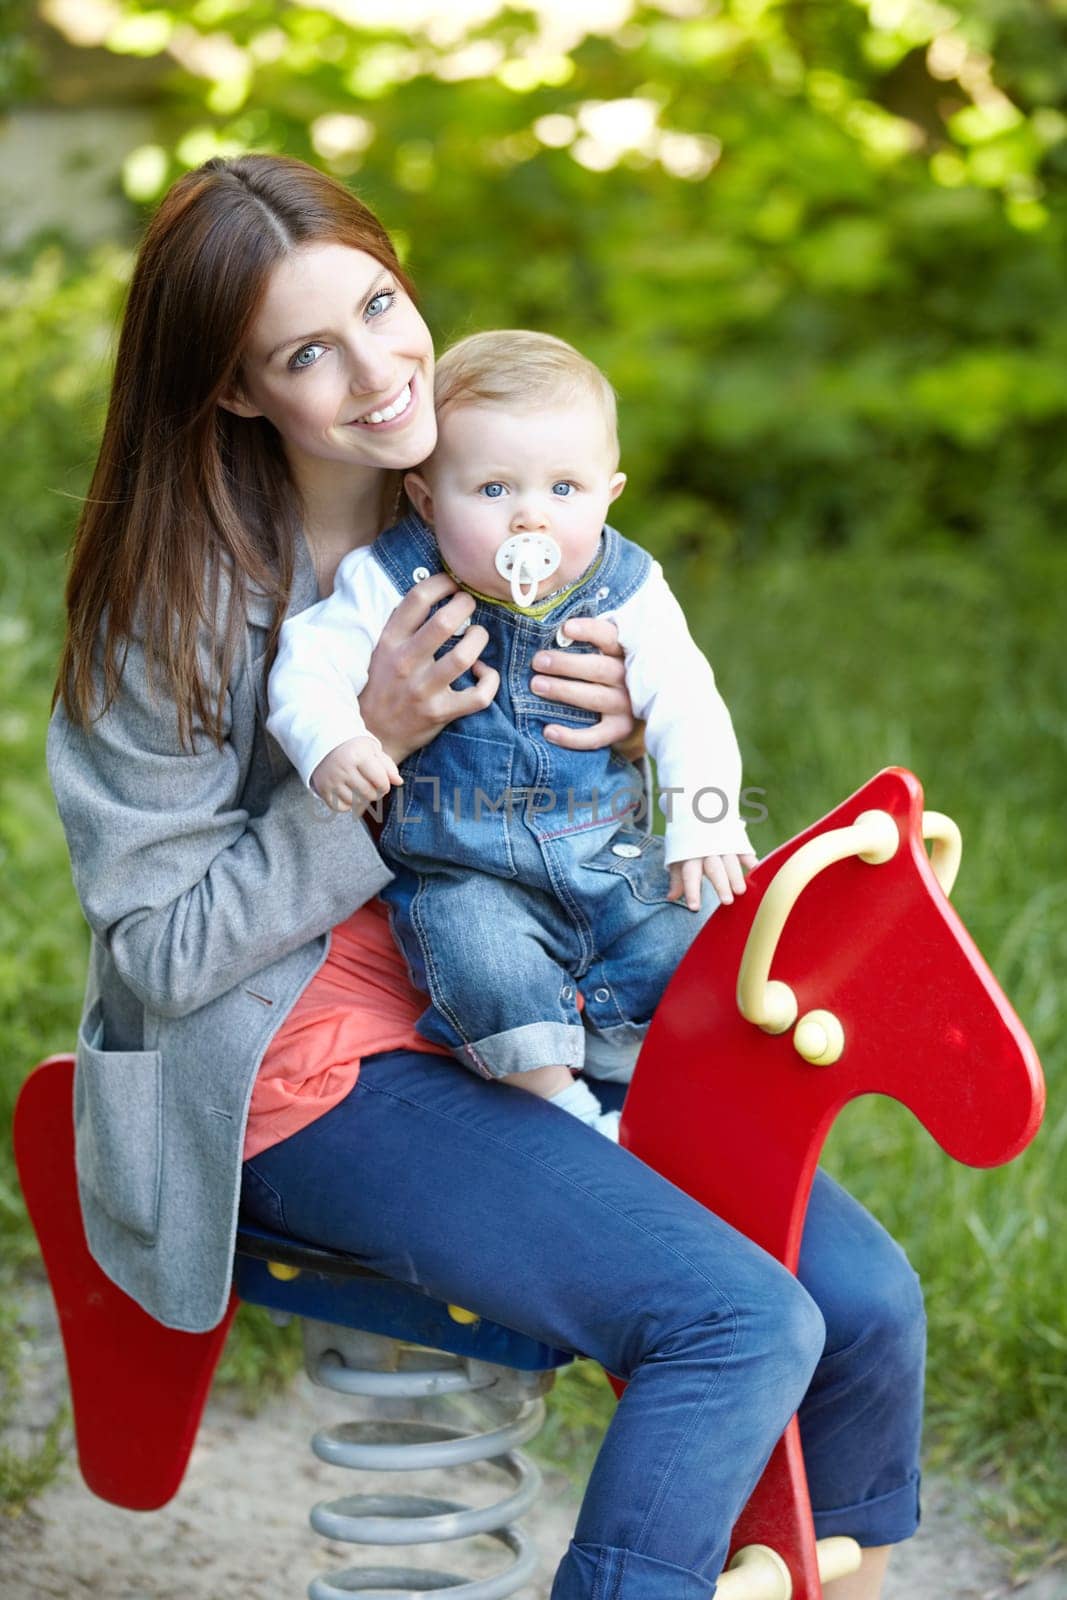 Portrait, mother and baby with toy, horse and park for fun in bond by playing for outside together. Happy woman, infant or smile for milestone, future growth or development with love, support or care by YuriArcurs